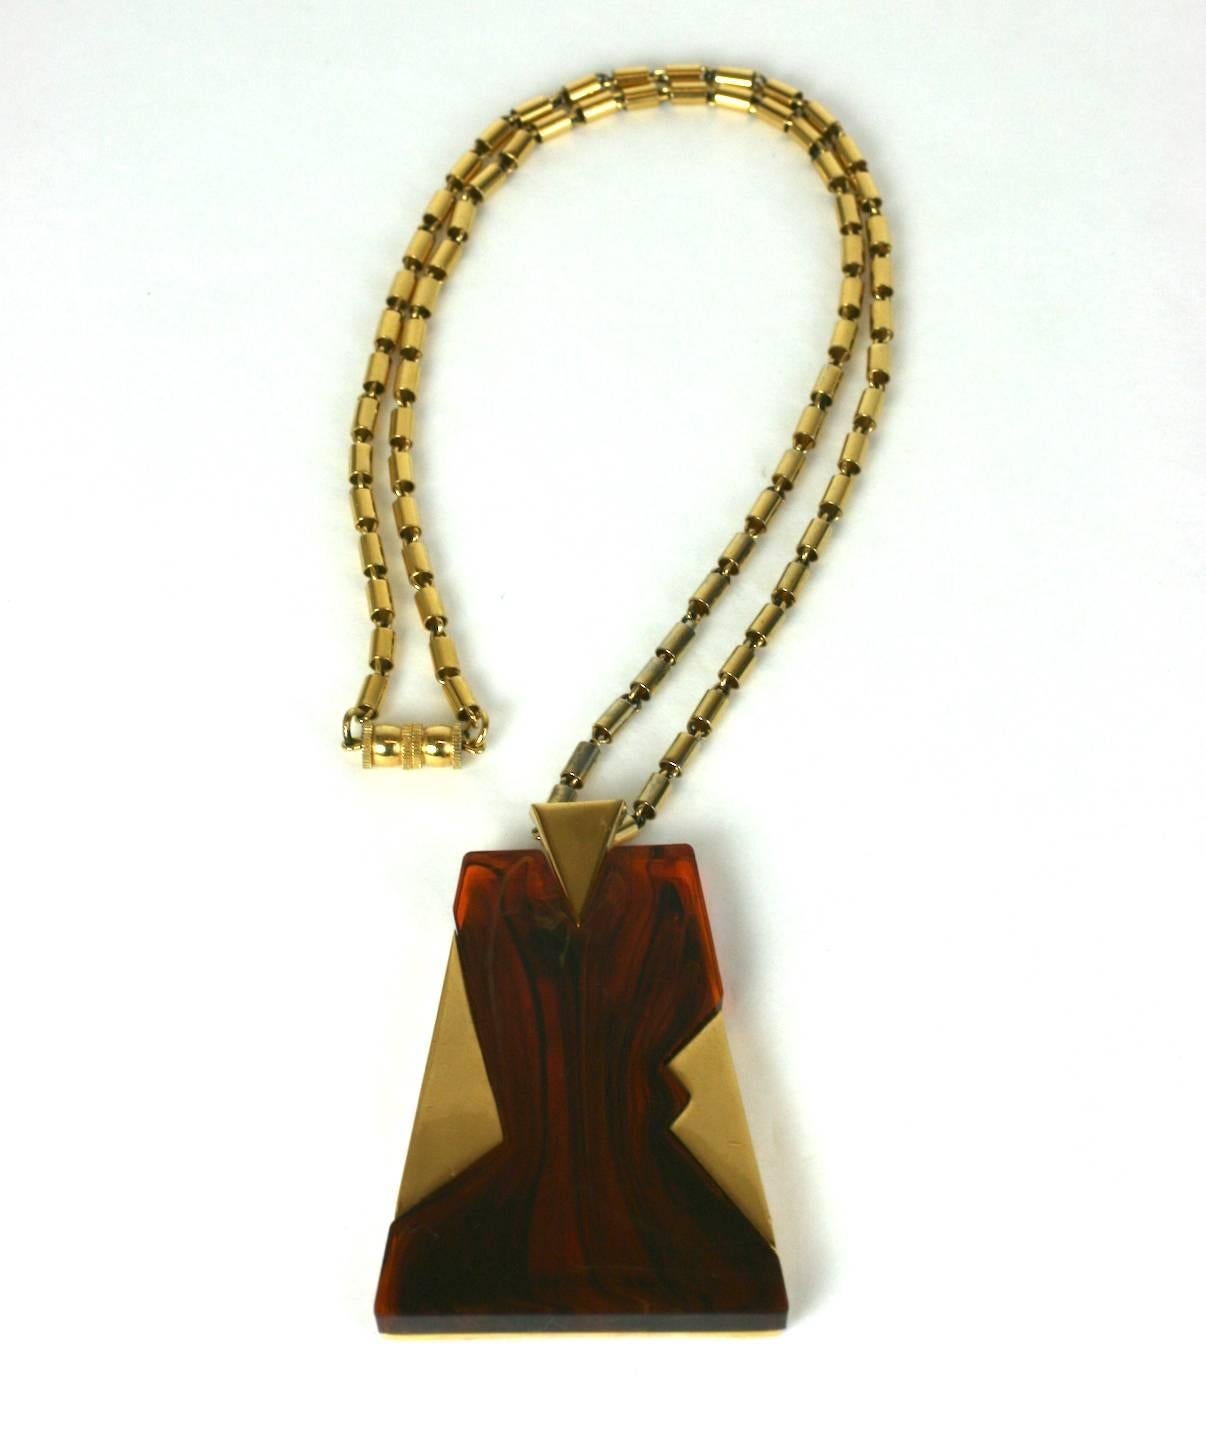 Trifari Art Deco Style Pendant in bakelite and gilt metal. Art Deco styling with barrel link chain. 1970's USA.
Excellent condition. 
Pendant 3